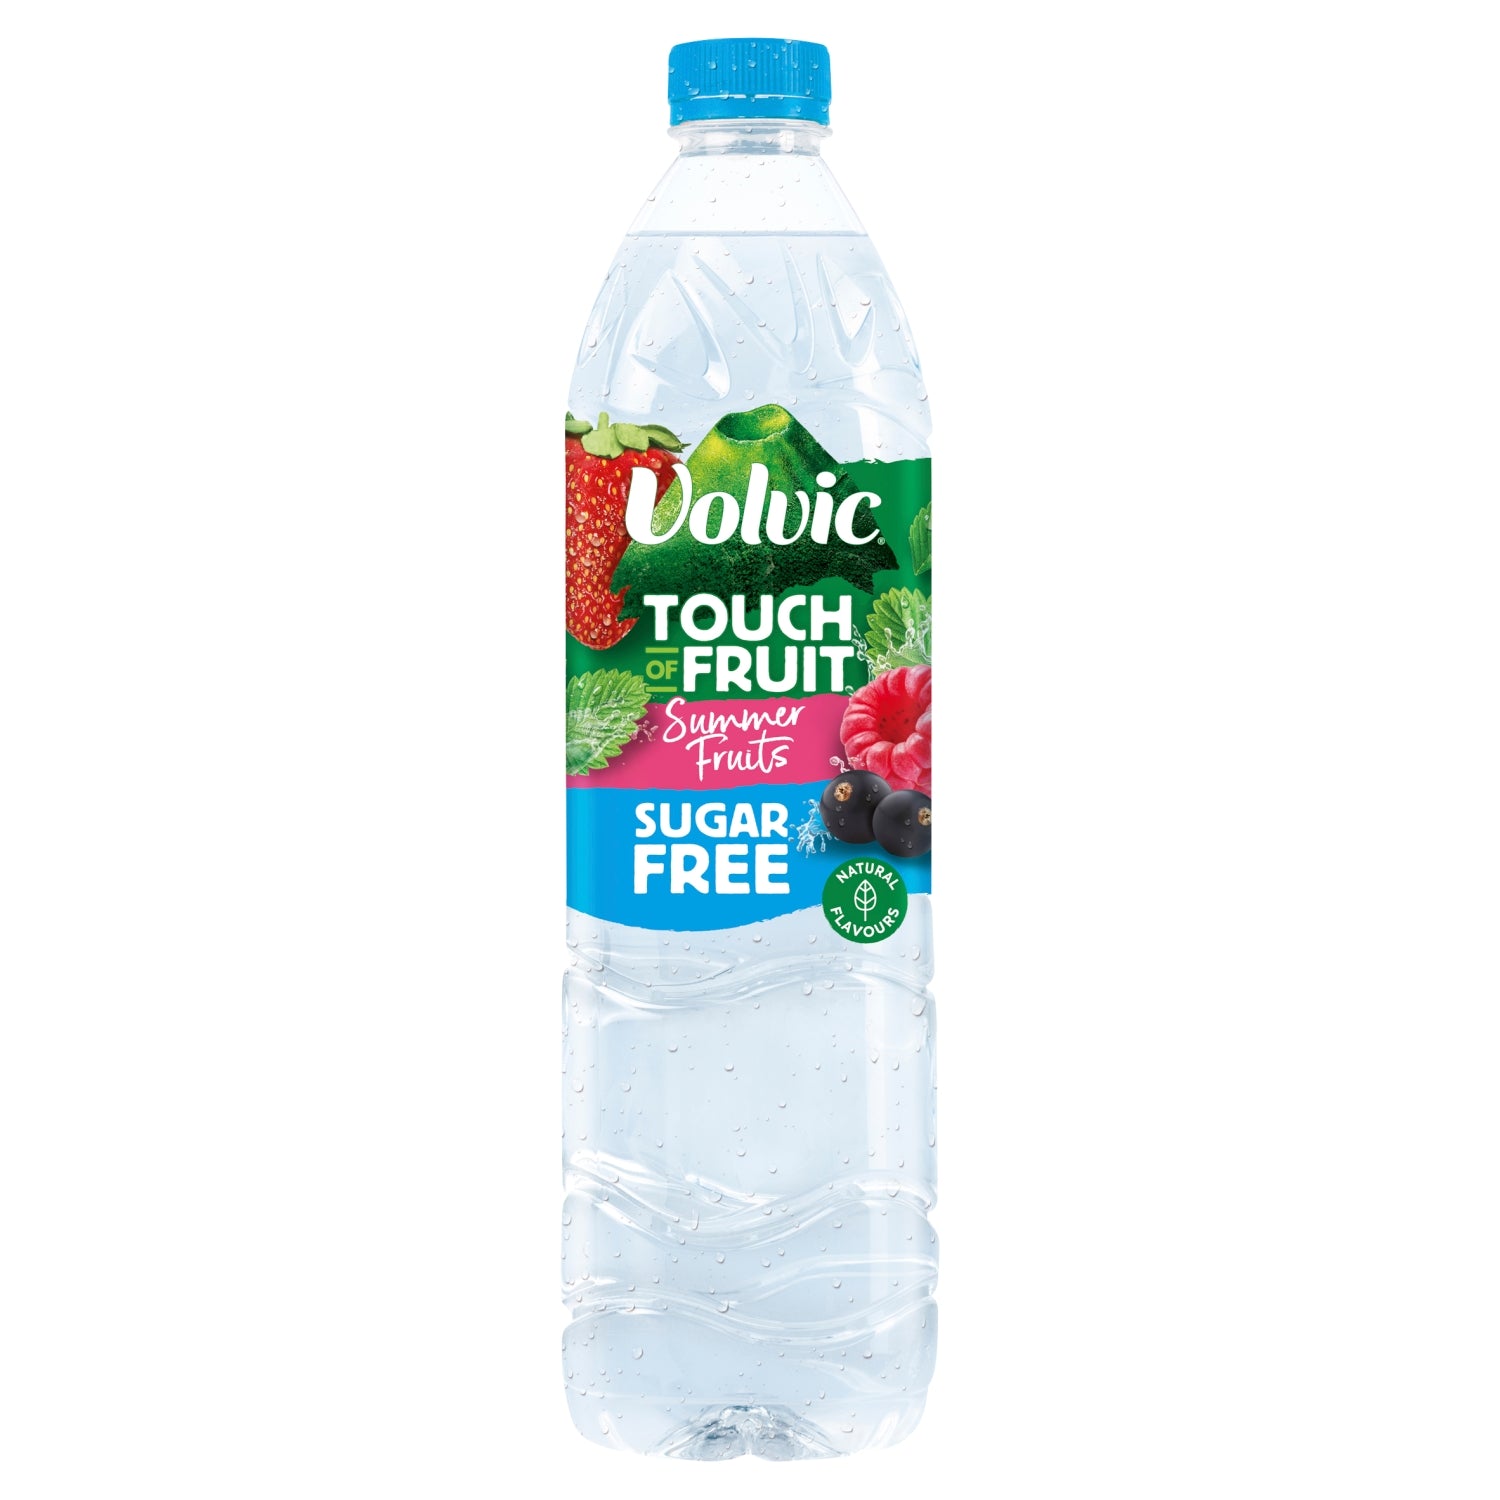 Volvic Touch Of Fruit Sugar Free Summer Fruits 1.5L